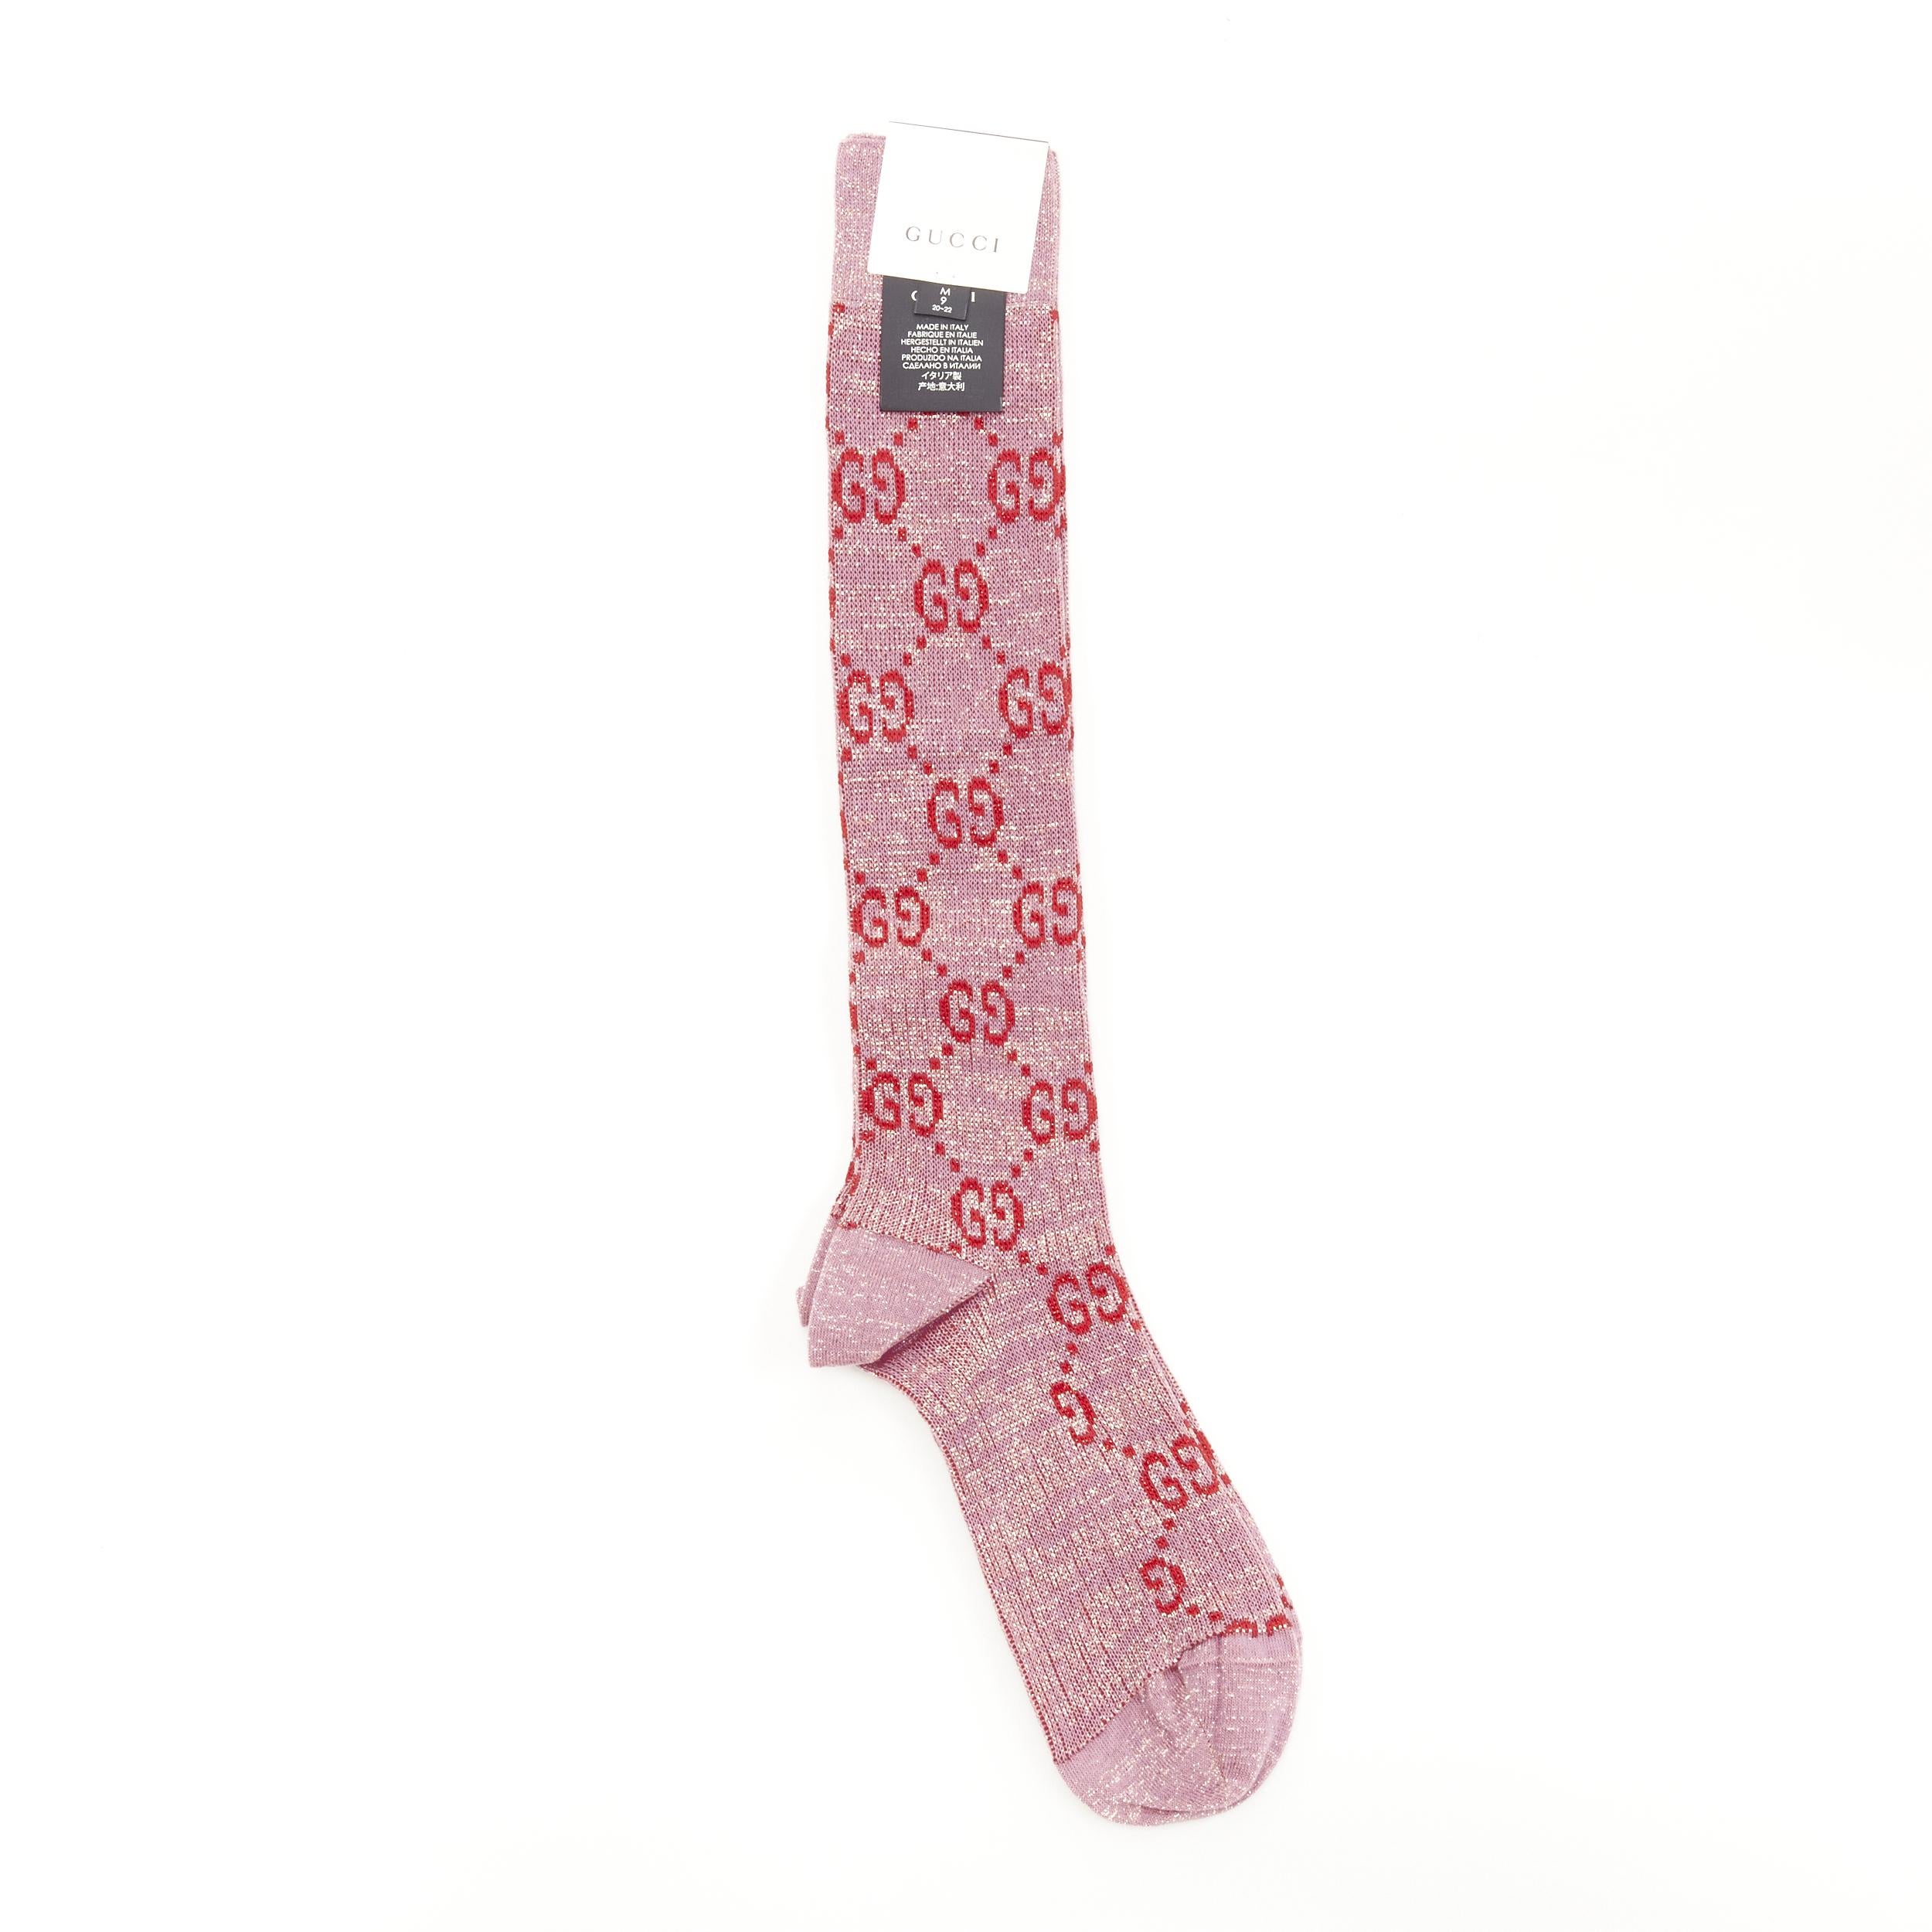 new GUCCI pink gold lurex metallic GG monogram long socks M Reference: ANWU/A00097 Brand: Gucci Designer: Alessandro Michele Material: Cotton Color: Pink Pattern: Logo Extra Detail: Metallic gold speckle lurex. Made in: Italy CONDITION: Condition: